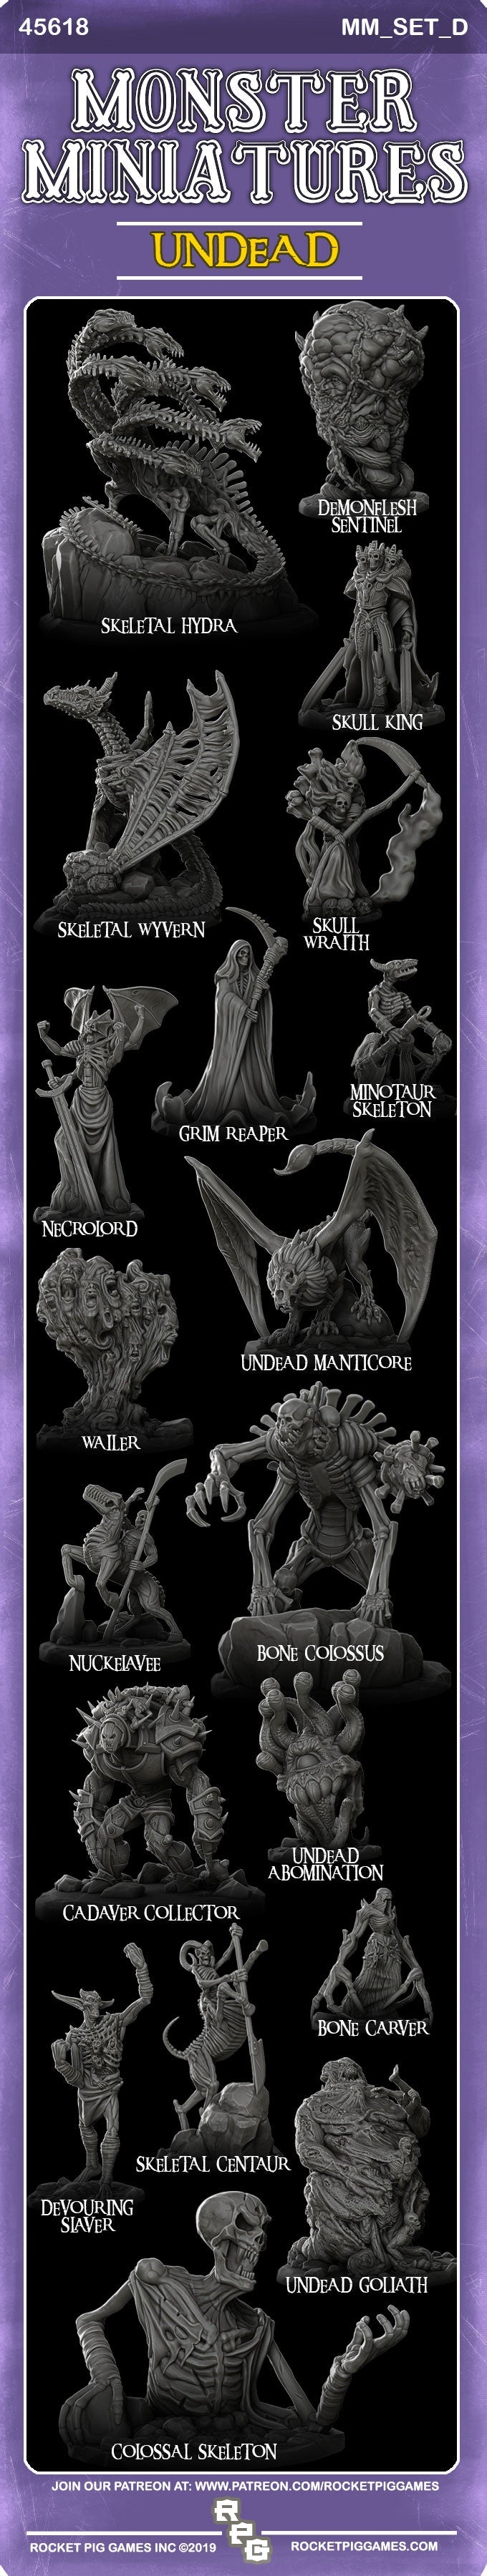 UNDEAD COLLECTION - Resin miniatures | Many Size Options |Dungeons and dragons | Cthulhu| Pathfinder | War Gaming